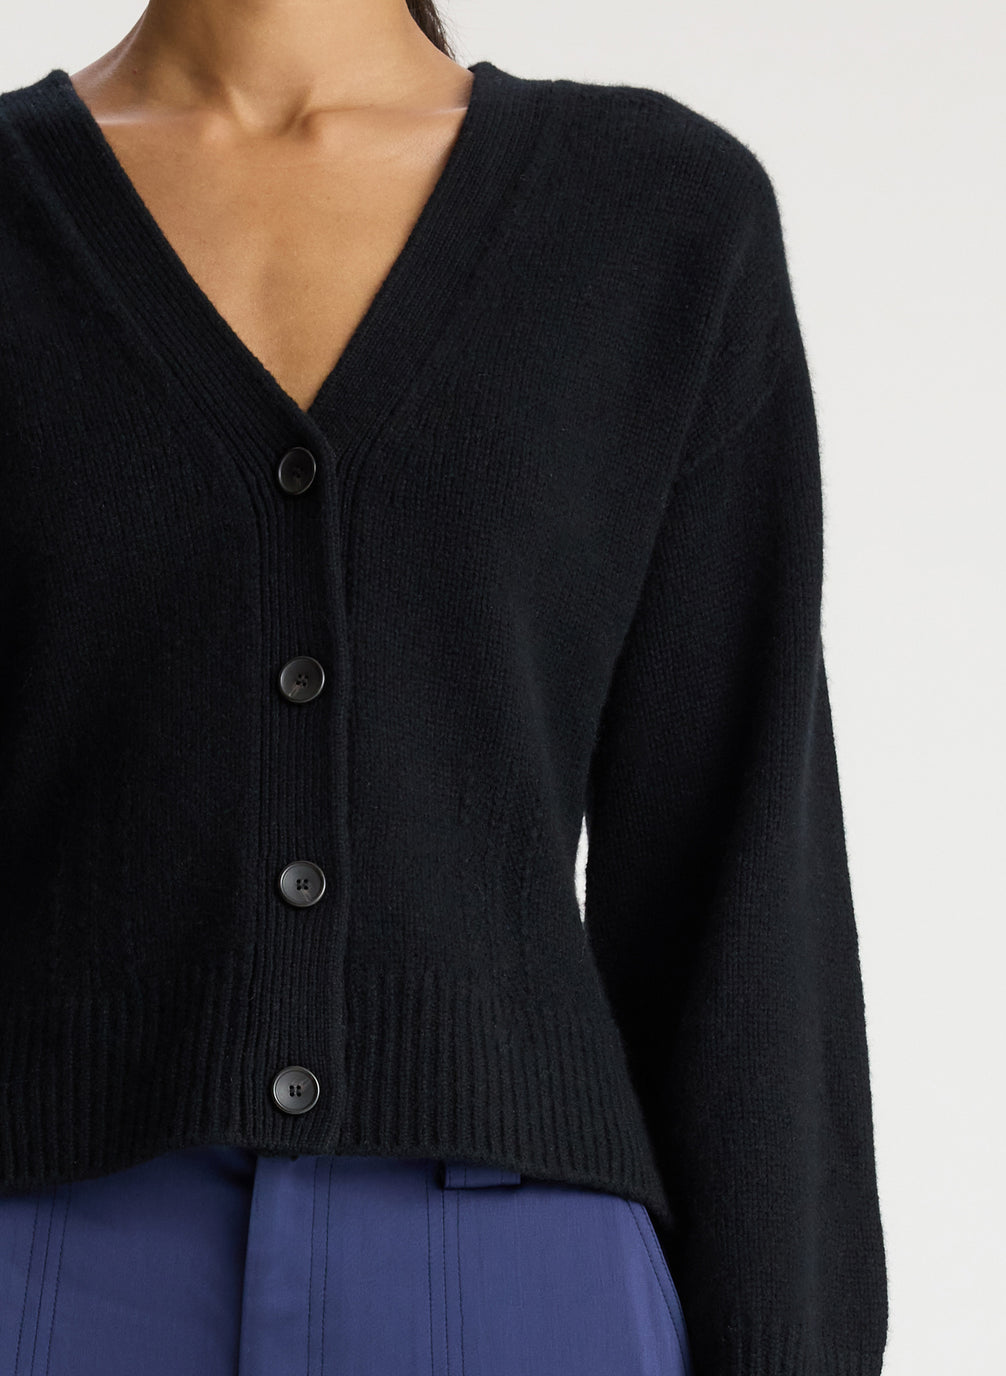 detail view of woman wearing black cardigan with navy blue cargo pants